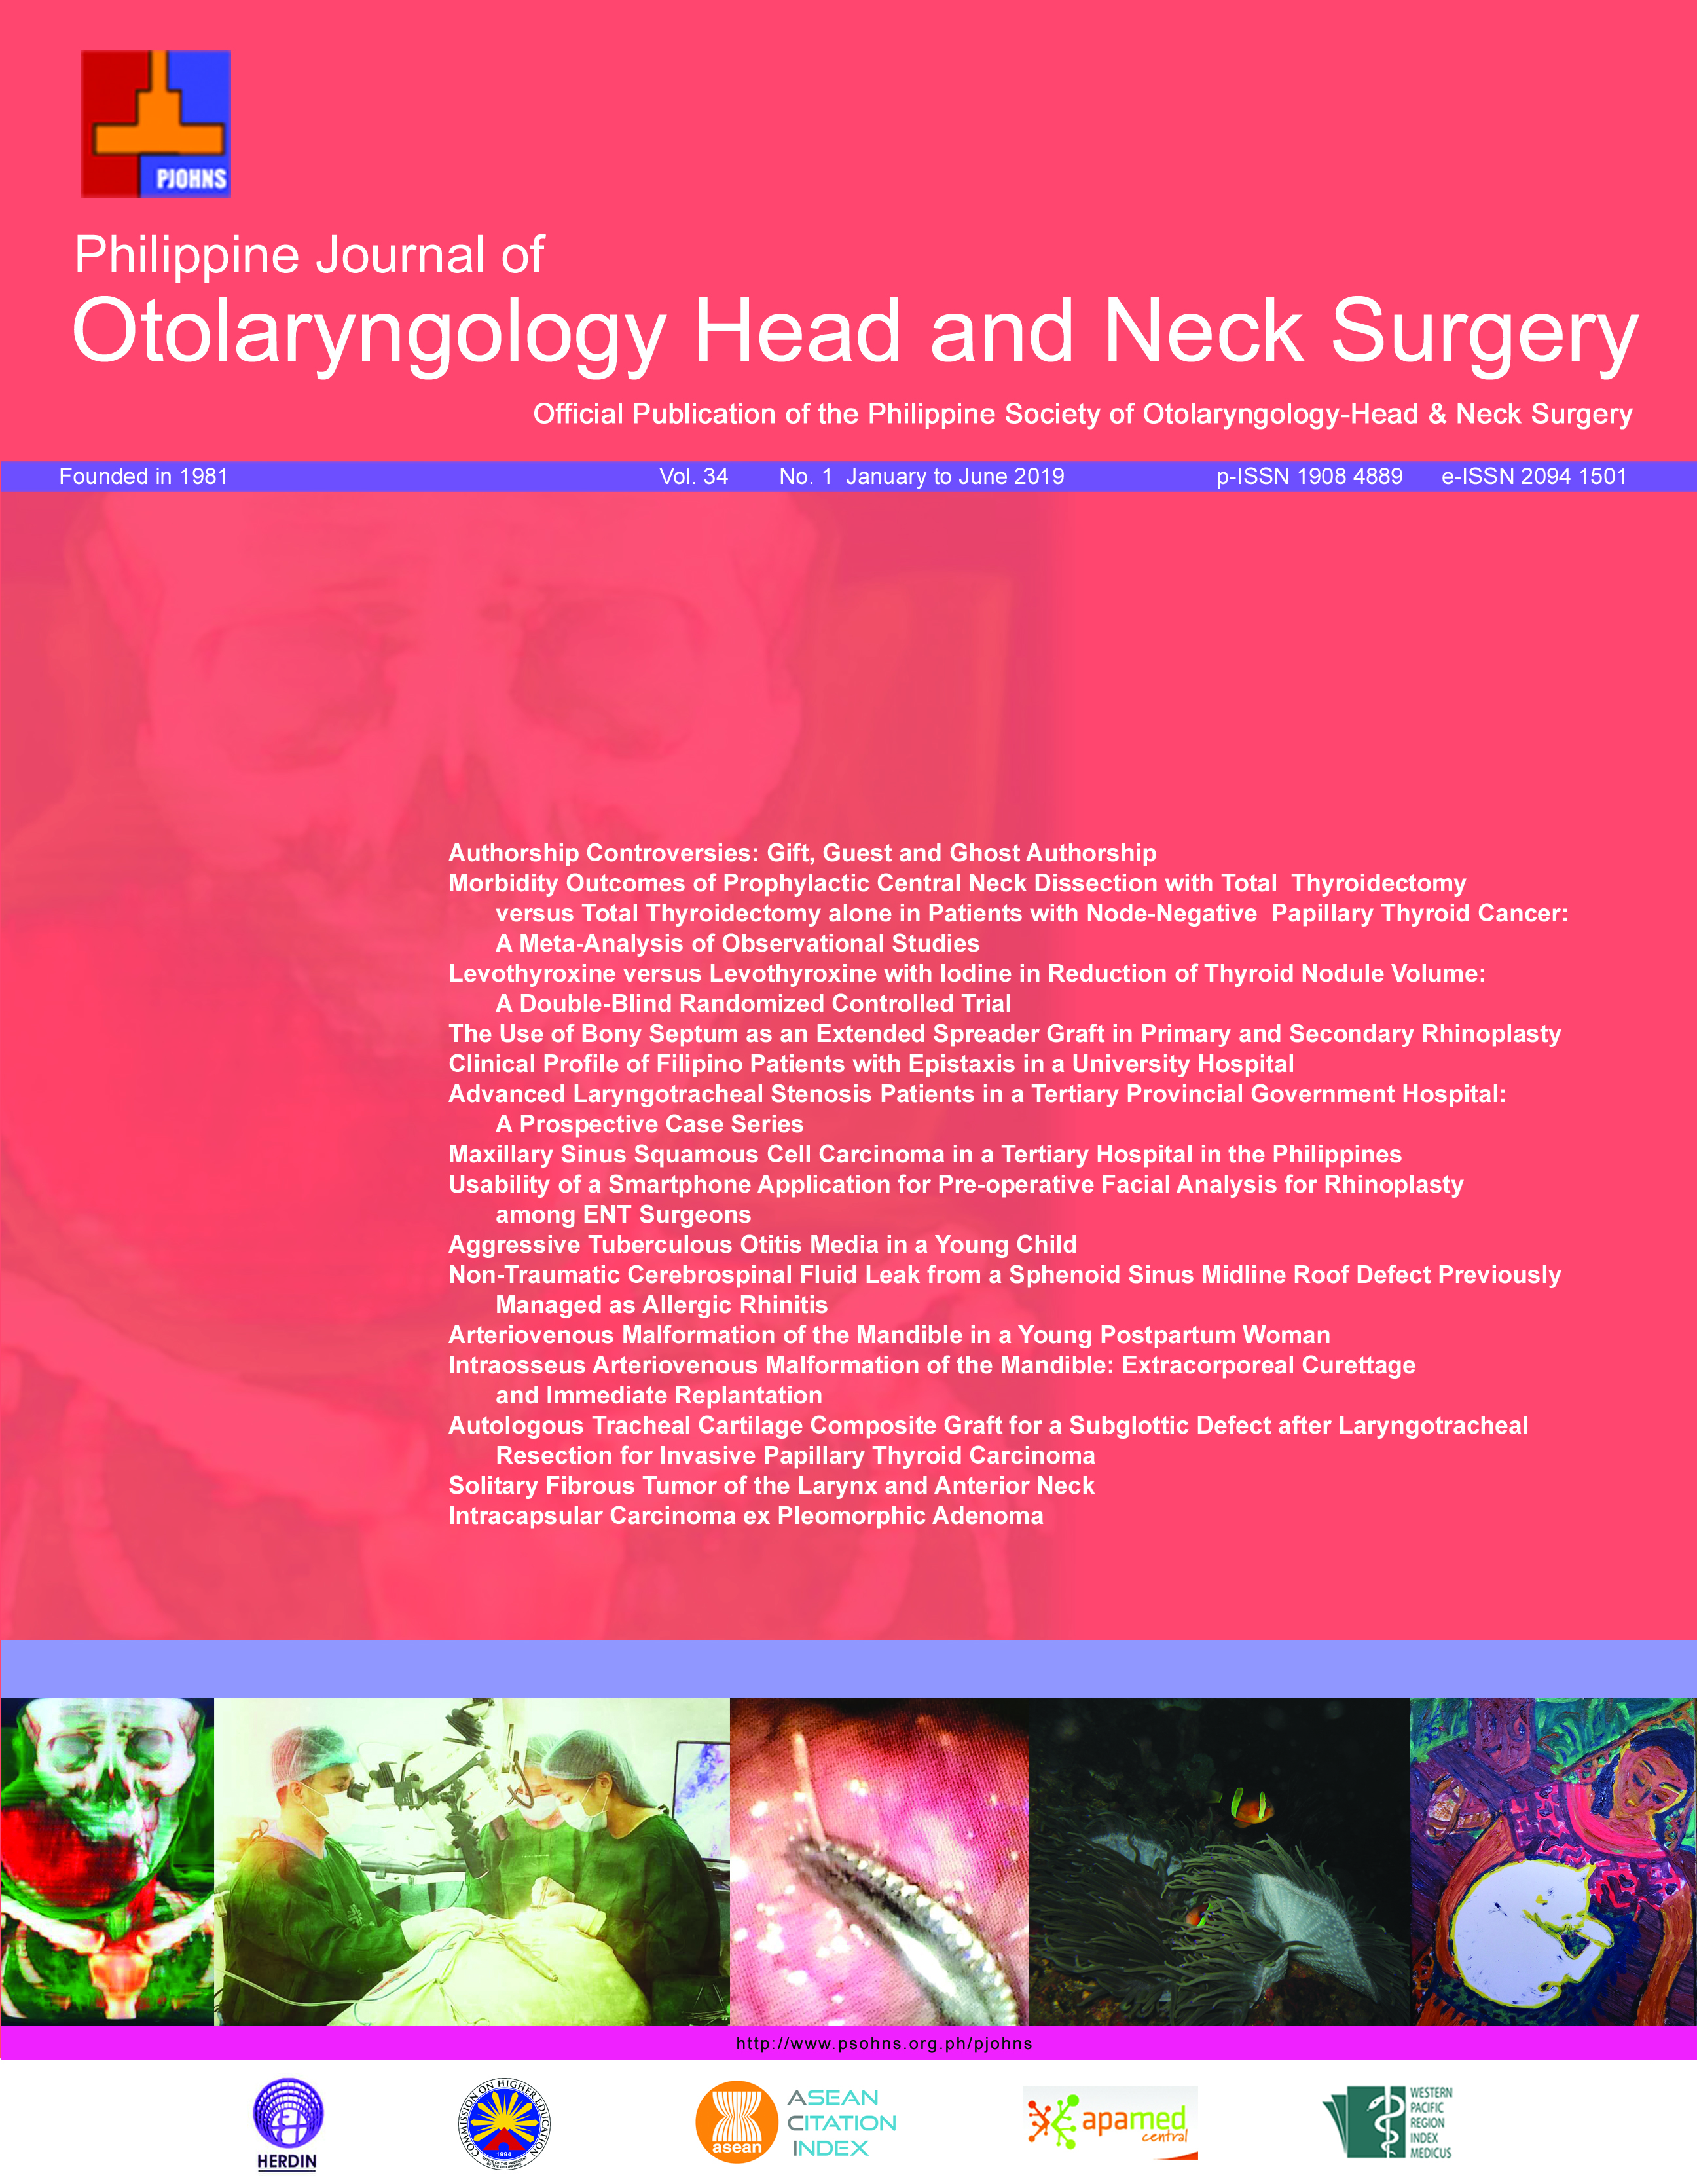 					View Vol. 34 No. 1 (2019): Philippine Journal of Otolaryngology Head and Neck Surgery
				